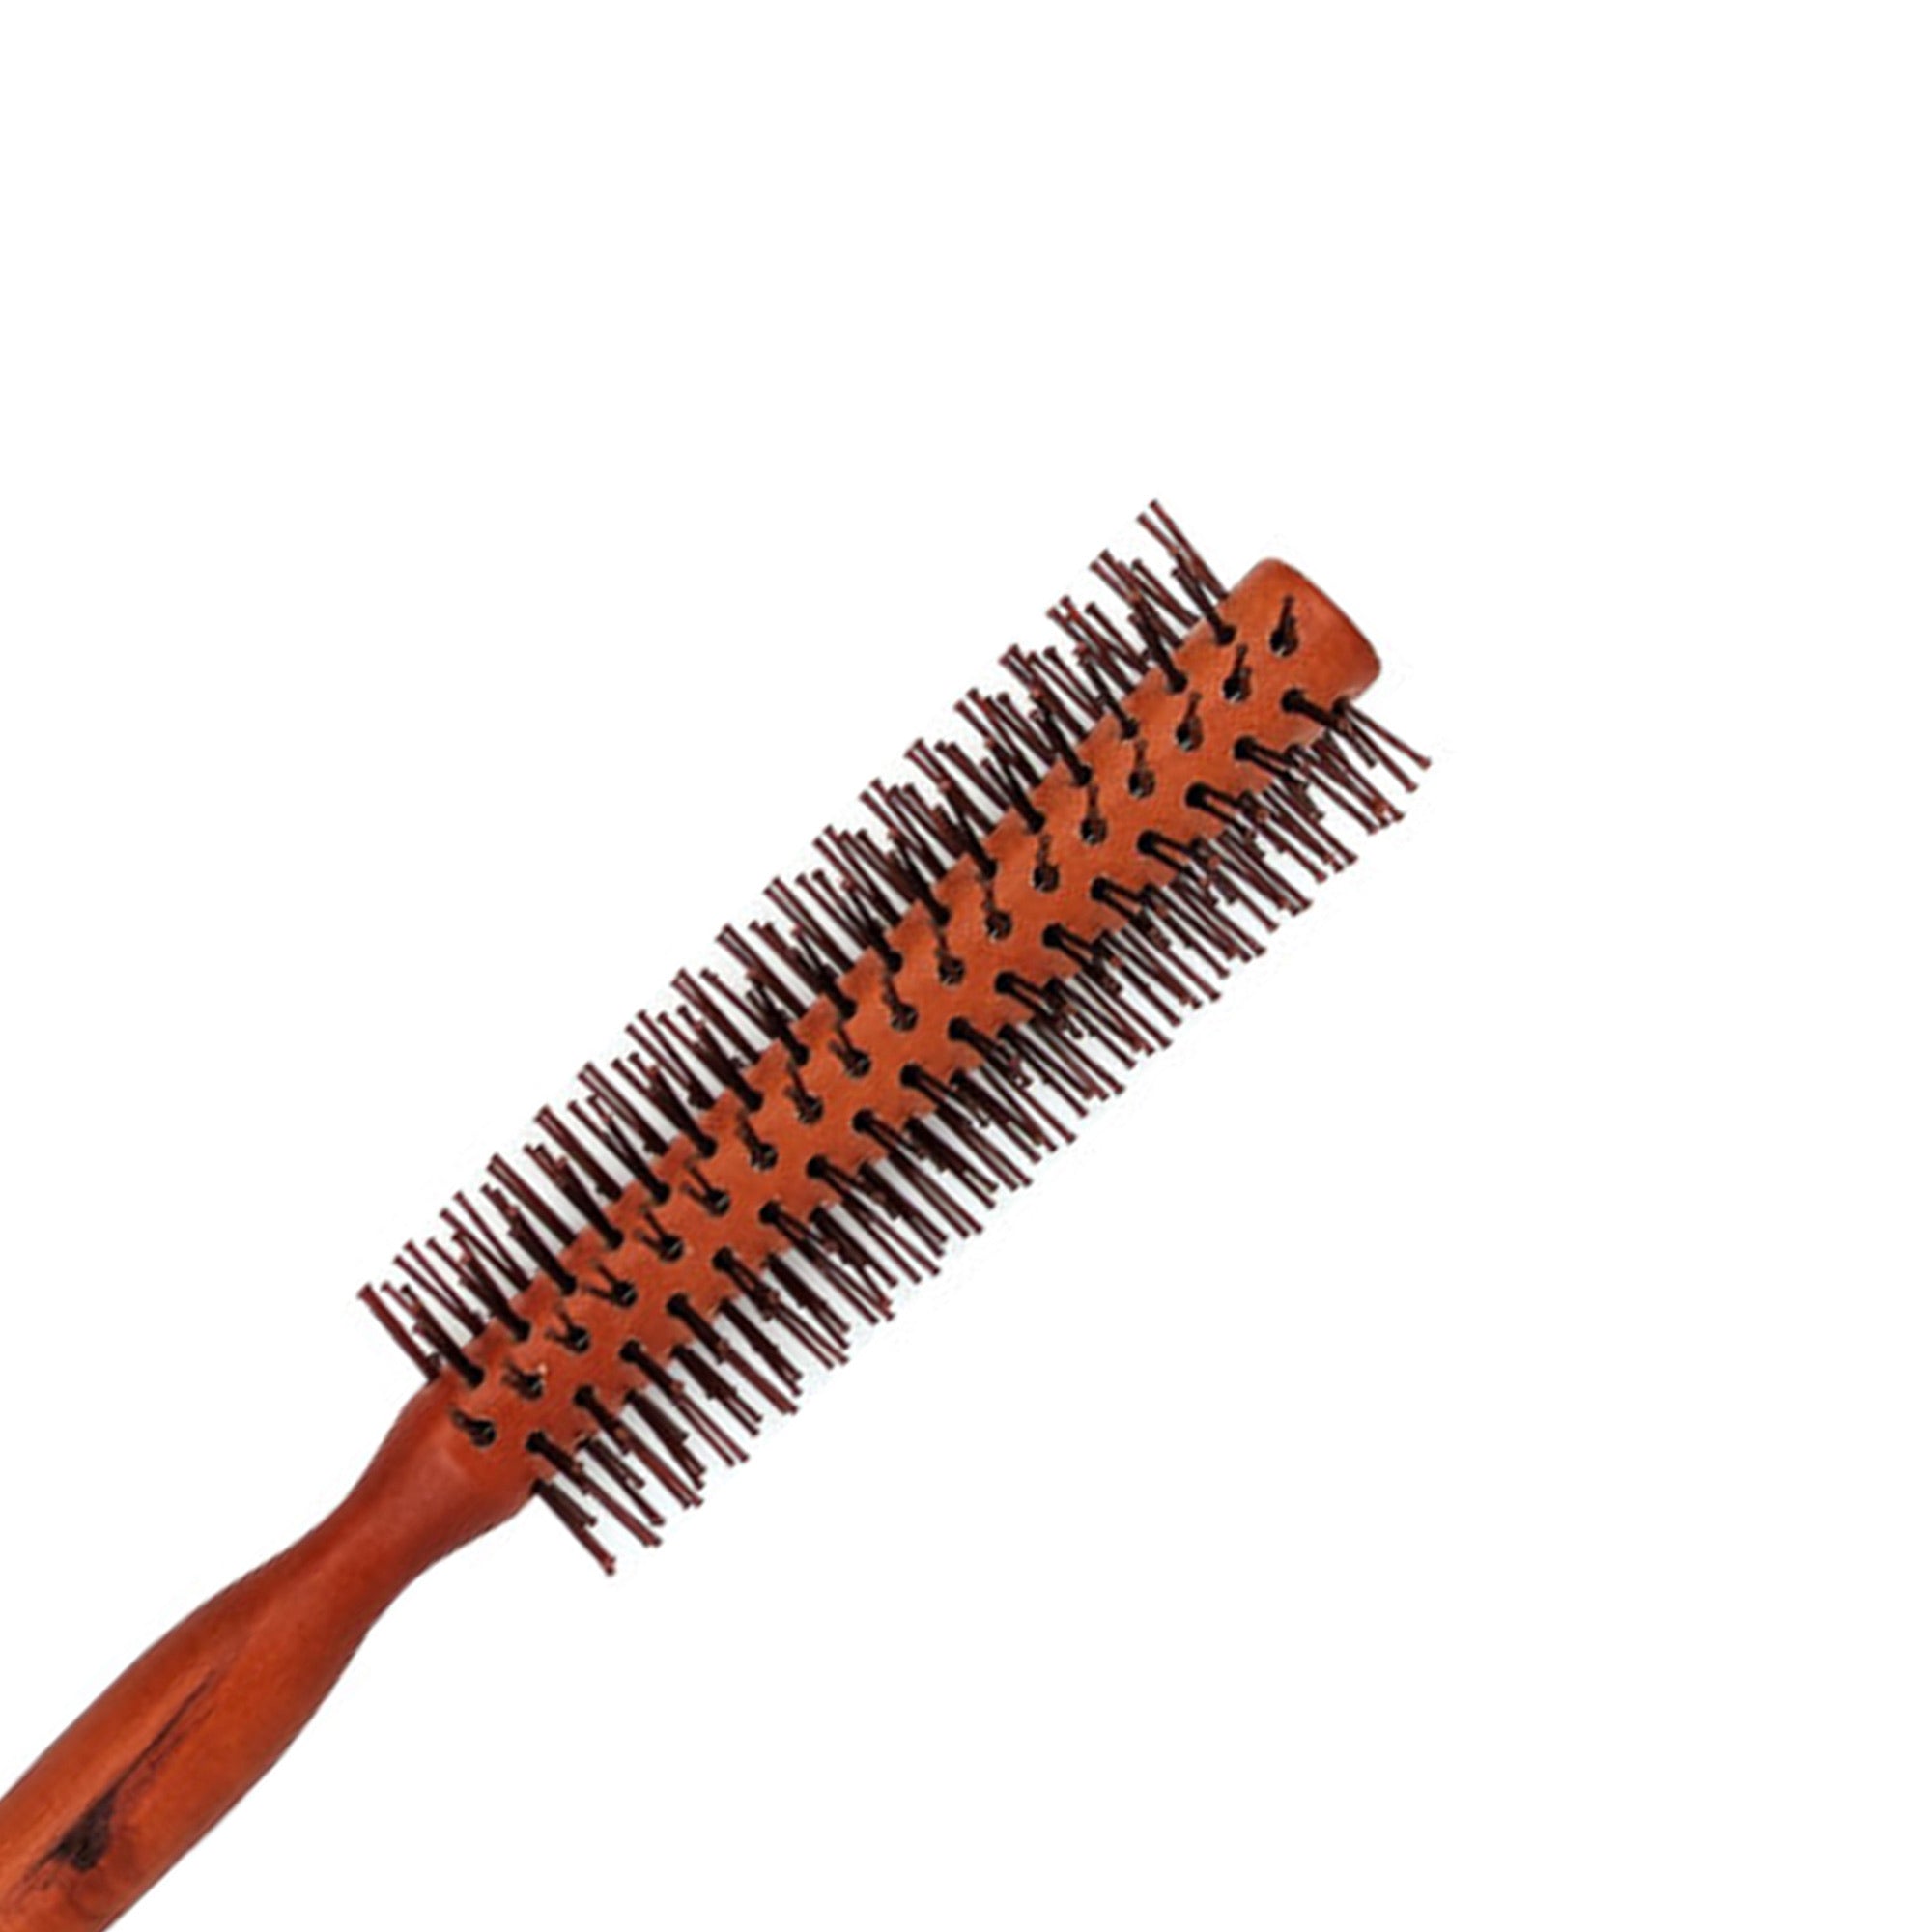 Eson - Round Hair Brush Wooden Pointed Tail Handle 23x4cm